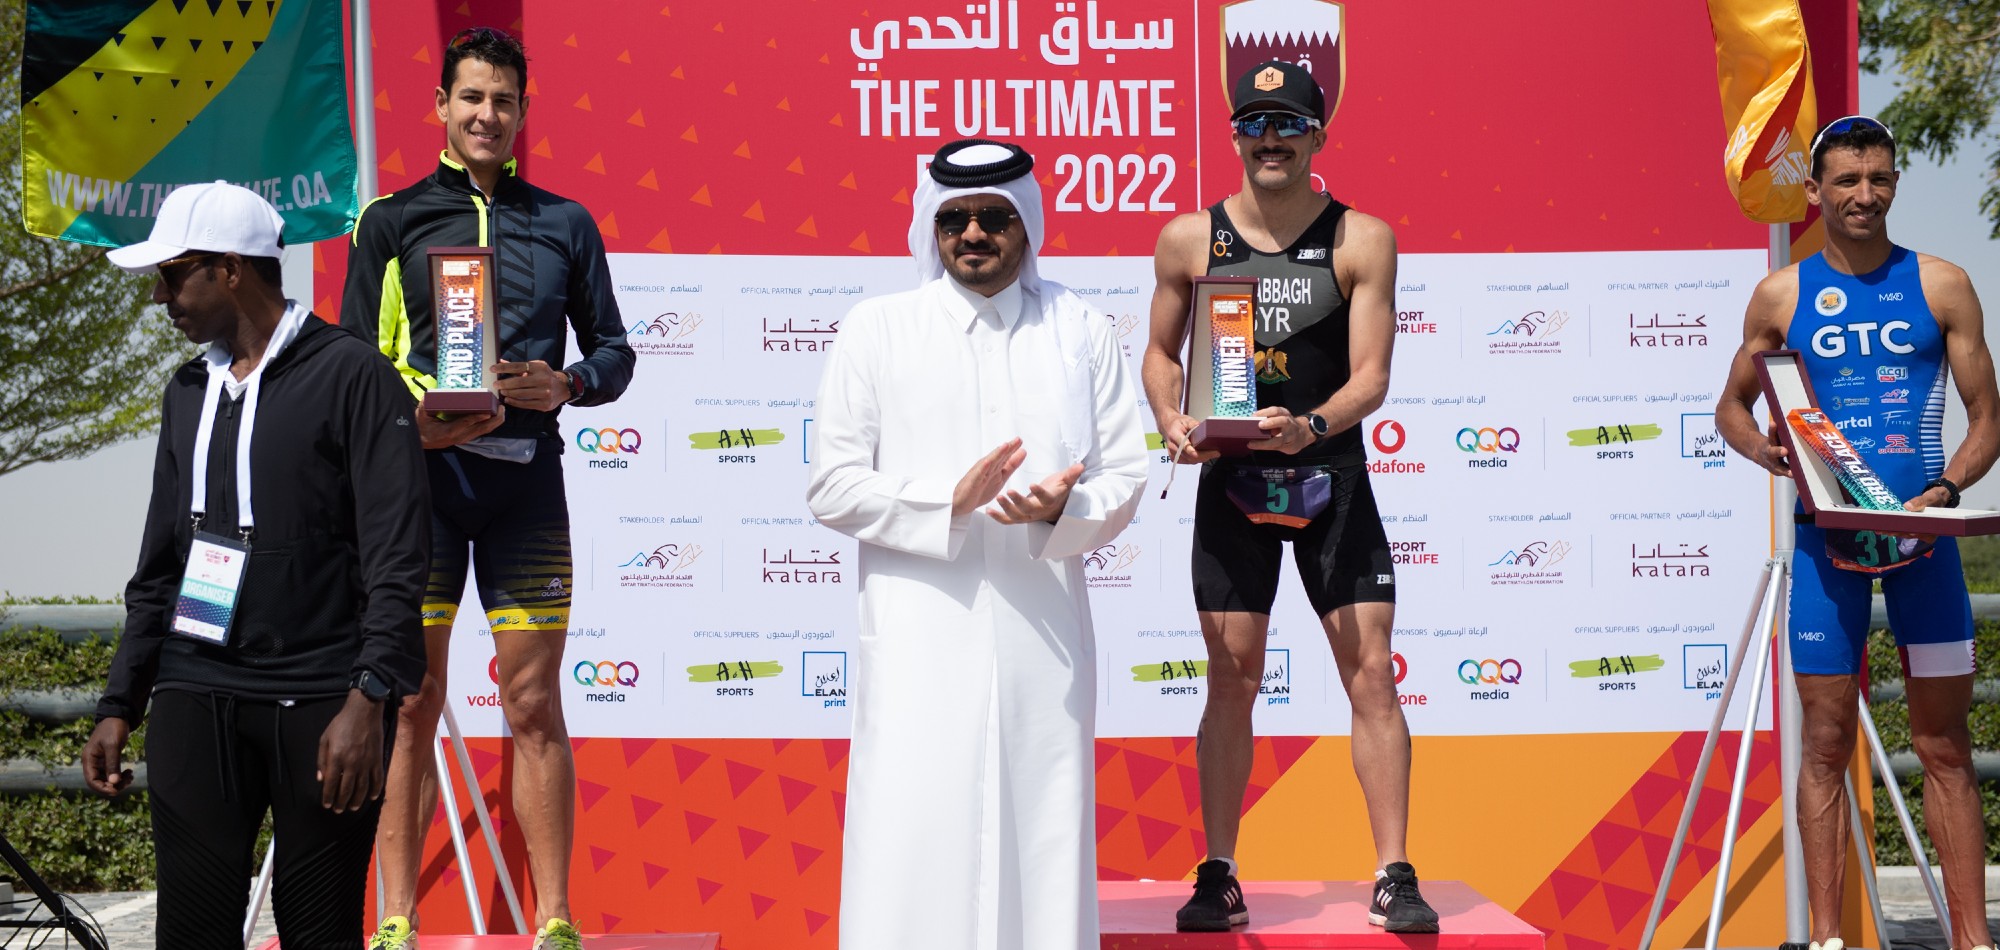 Sheikh Joaan crowns winners of the QOC Ultimate Race 2022